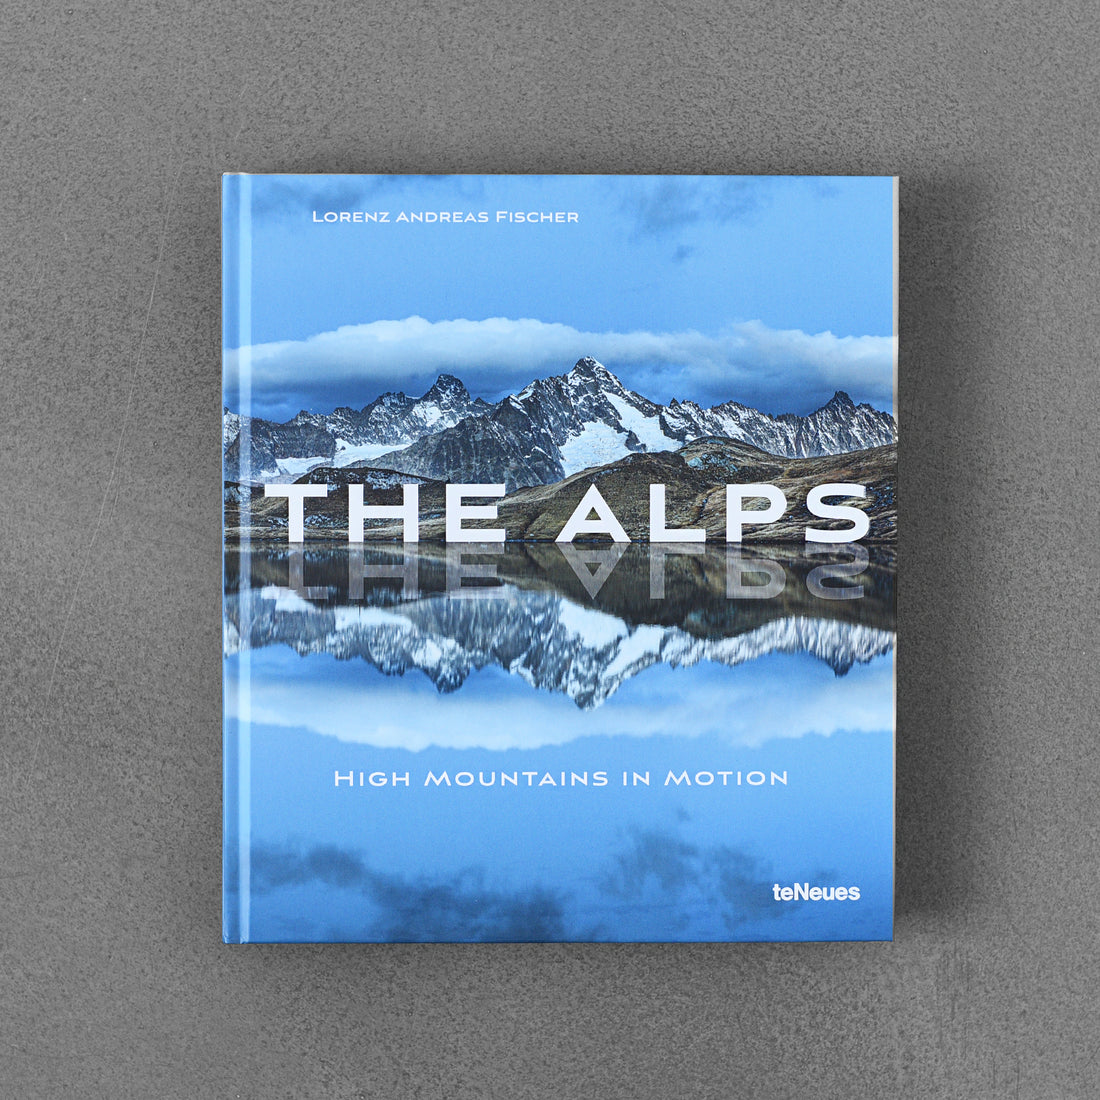 The Alps: High Mountains in Motion - Lorenz Andreas Fischer